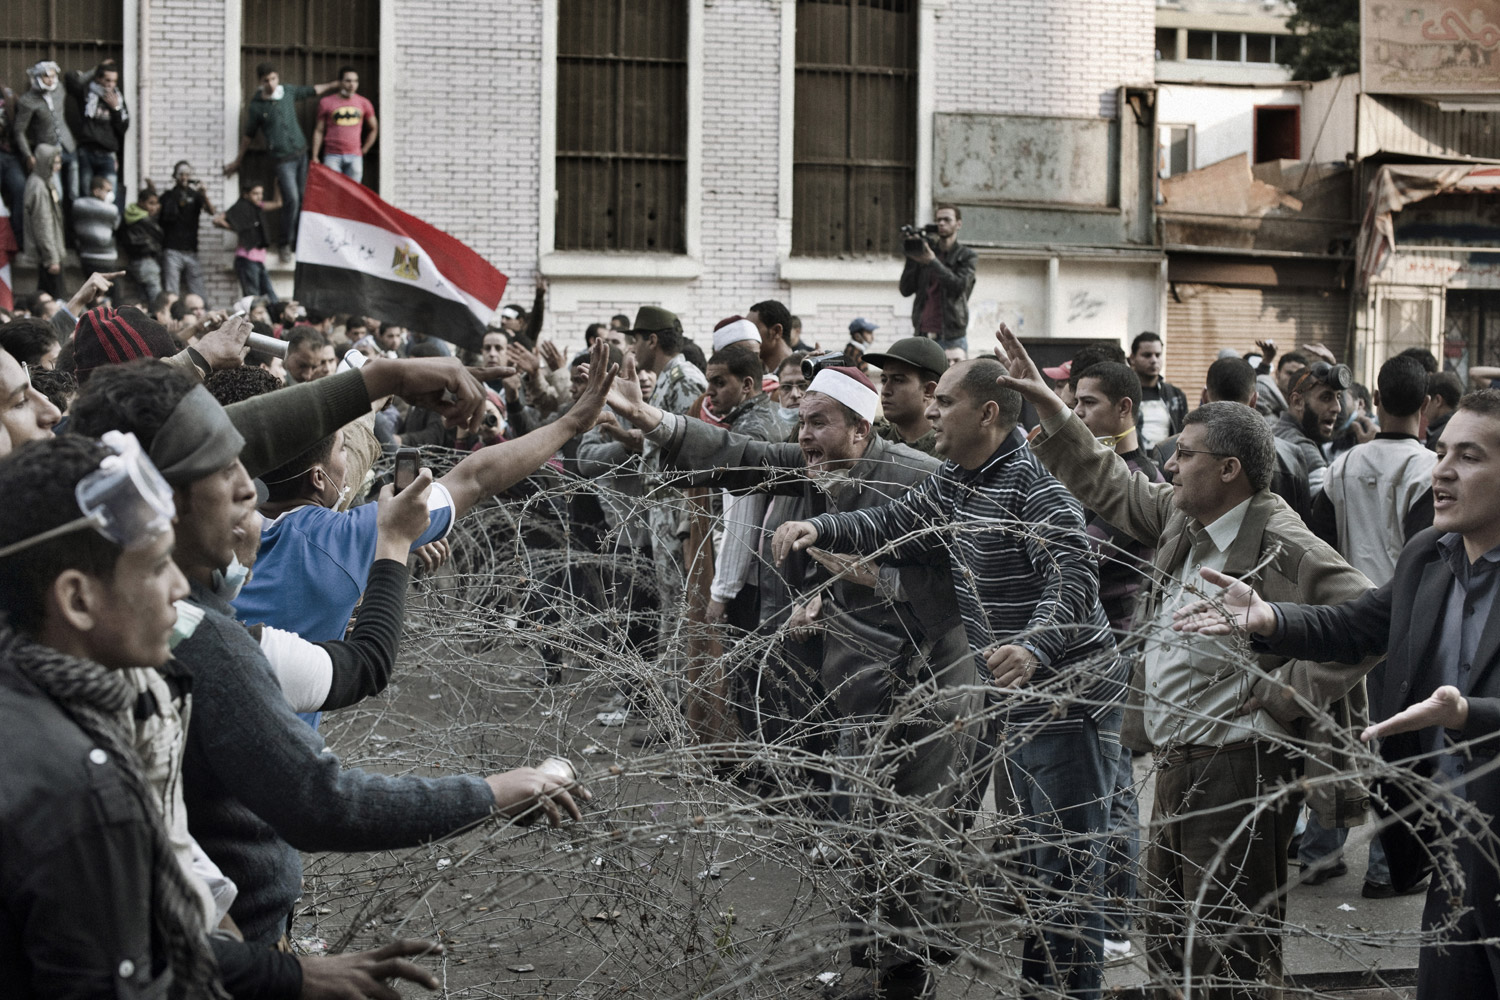 Protesters separated by barb wire argue with one another during a lull in clashes, November 23, 2011.